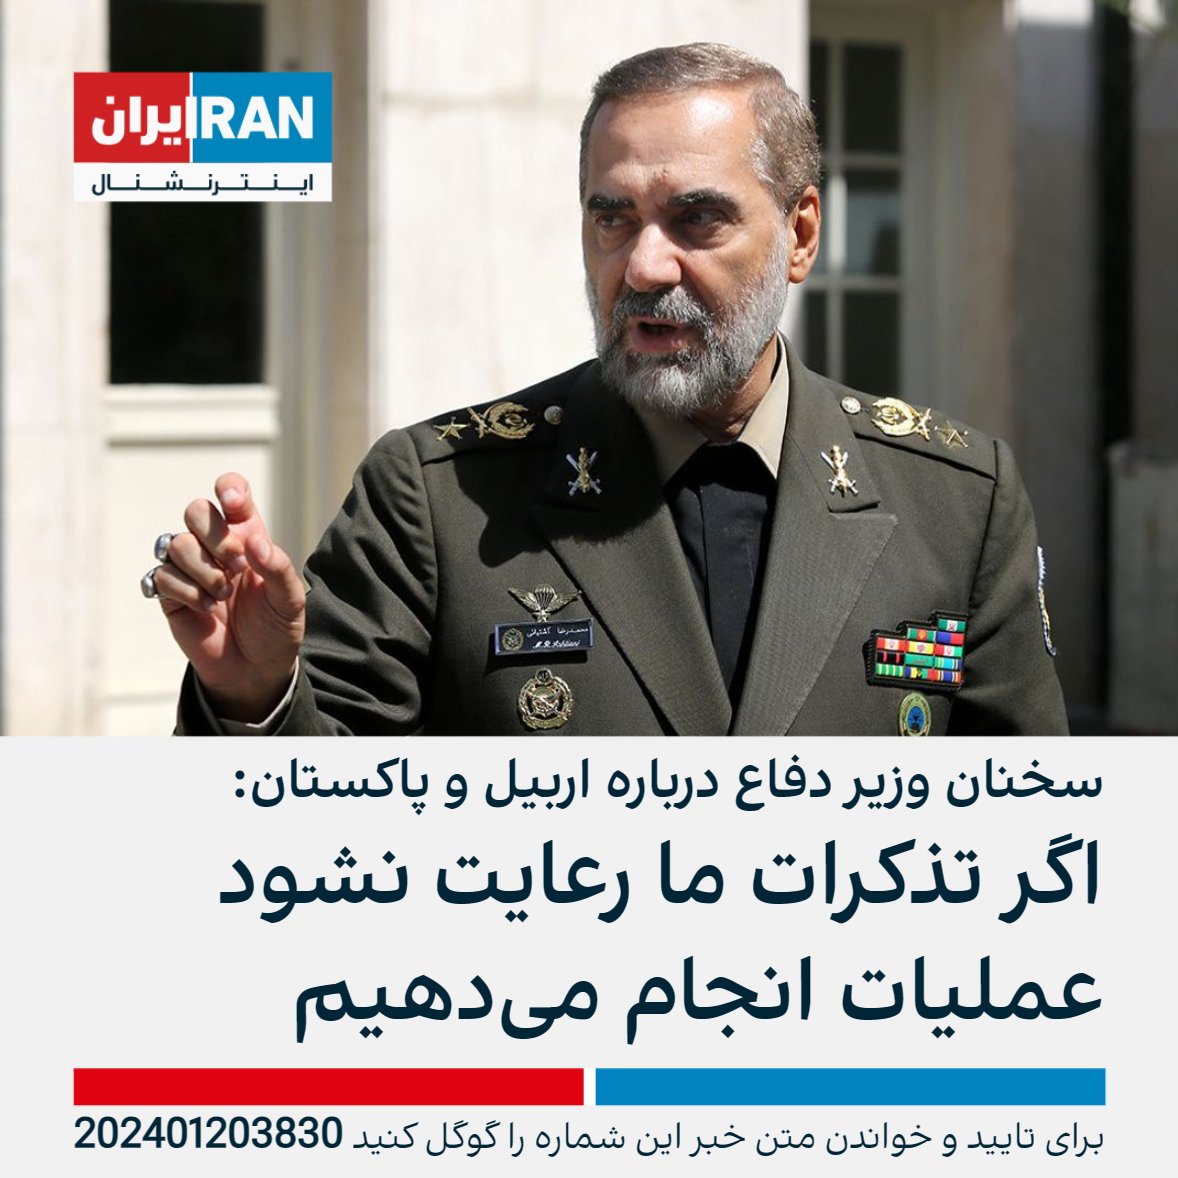 Referring to the missile attack on Erbil and Pakistan, Defense Minister Mohammad Reza Ashtiani said: We will not accept any threats against us from the countries that are neighboring to us. He added: We have already warned and if we see that it is not respected, we will use our legitimate right and carry out operations.